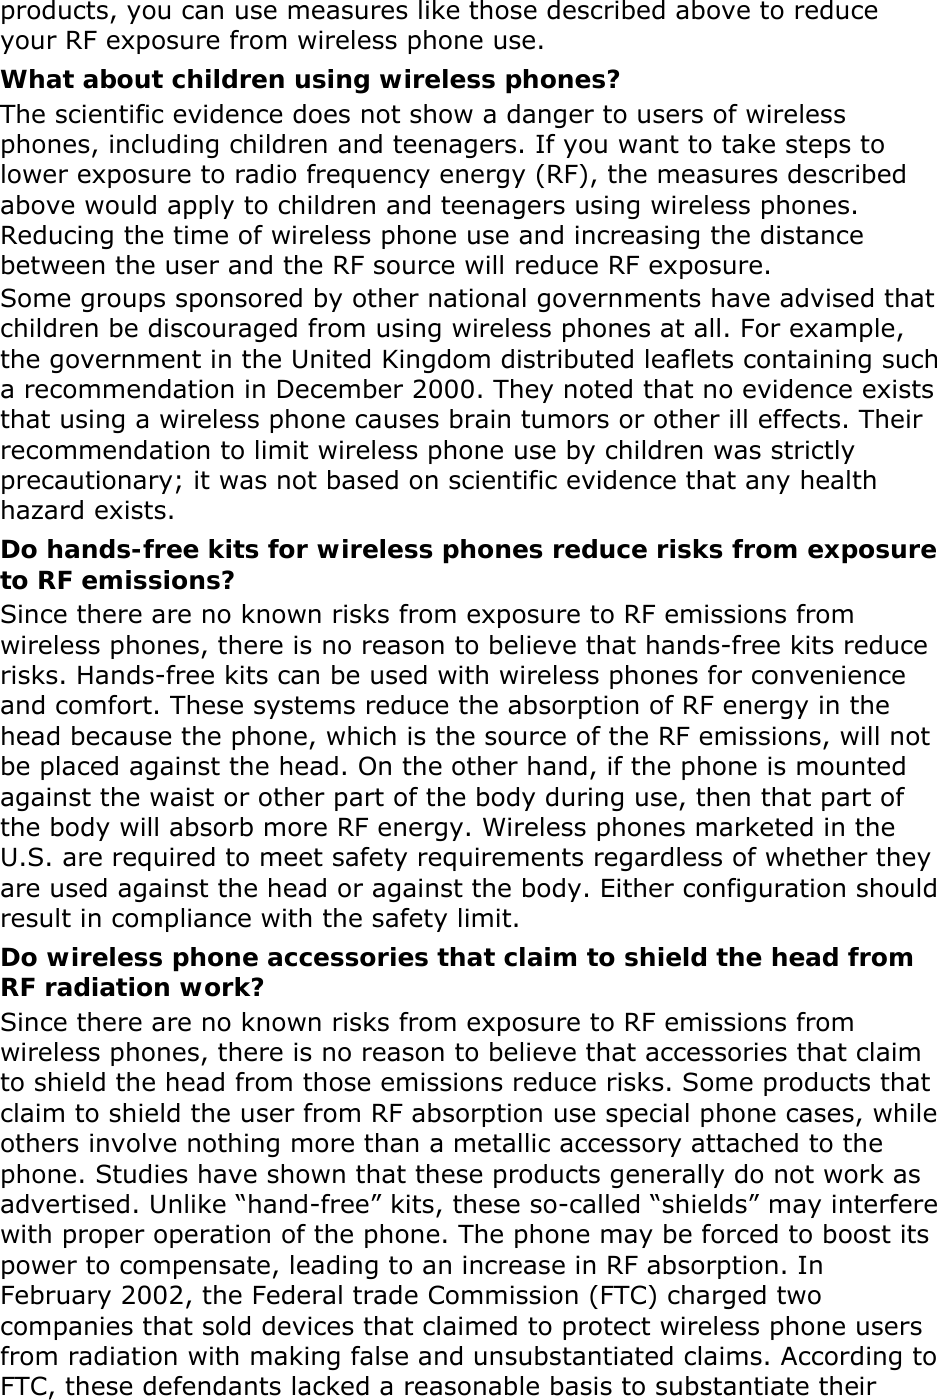 products, you can use measures like those described above to reduce your RF exposure from wireless phone use. What about children using wireless phones? The scientific evidence does not show a danger to users of wireless phones, including children and teenagers. If you want to take steps to lower exposure to radio frequency energy (RF), the measures described above would apply to children and teenagers using wireless phones. Reducing the time of wireless phone use and increasing the distance between the user and the RF source will reduce RF exposure. Some groups sponsored by other national governments have advised that children be discouraged from using wireless phones at all. For example, the government in the United Kingdom distributed leaflets containing such a recommendation in December 2000. They noted that no evidence exists that using a wireless phone causes brain tumors or other ill effects. Their recommendation to limit wireless phone use by children was strictly precautionary; it was not based on scientific evidence that any health hazard exists.   Do hands-free kits for wireless phones reduce risks from exposure to RF emissions? Since there are no known risks from exposure to RF emissions from wireless phones, there is no reason to believe that hands-free kits reduce risks. Hands-free kits can be used with wireless phones for convenience and comfort. These systems reduce the absorption of RF energy in the head because the phone, which is the source of the RF emissions, will not be placed against the head. On the other hand, if the phone is mounted against the waist or other part of the body during use, then that part of the body will absorb more RF energy. Wireless phones marketed in the U.S. are required to meet safety requirements regardless of whether they are used against the head or against the body. Either configuration should result in compliance with the safety limit. Do wireless phone accessories that claim to shield the head from RF radiation work? Since there are no known risks from exposure to RF emissions from wireless phones, there is no reason to believe that accessories that claim to shield the head from those emissions reduce risks. Some products that claim to shield the user from RF absorption use special phone cases, while others involve nothing more than a metallic accessory attached to the phone. Studies have shown that these products generally do not work as advertised. Unlike “hand-free” kits, these so-called “shields” may interfere with proper operation of the phone. The phone may be forced to boost its power to compensate, leading to an increase in RF absorption. In February 2002, the Federal trade Commission (FTC) charged two companies that sold devices that claimed to protect wireless phone users from radiation with making false and unsubstantiated claims. According to FTC, these defendants lacked a reasonable basis to substantiate their 